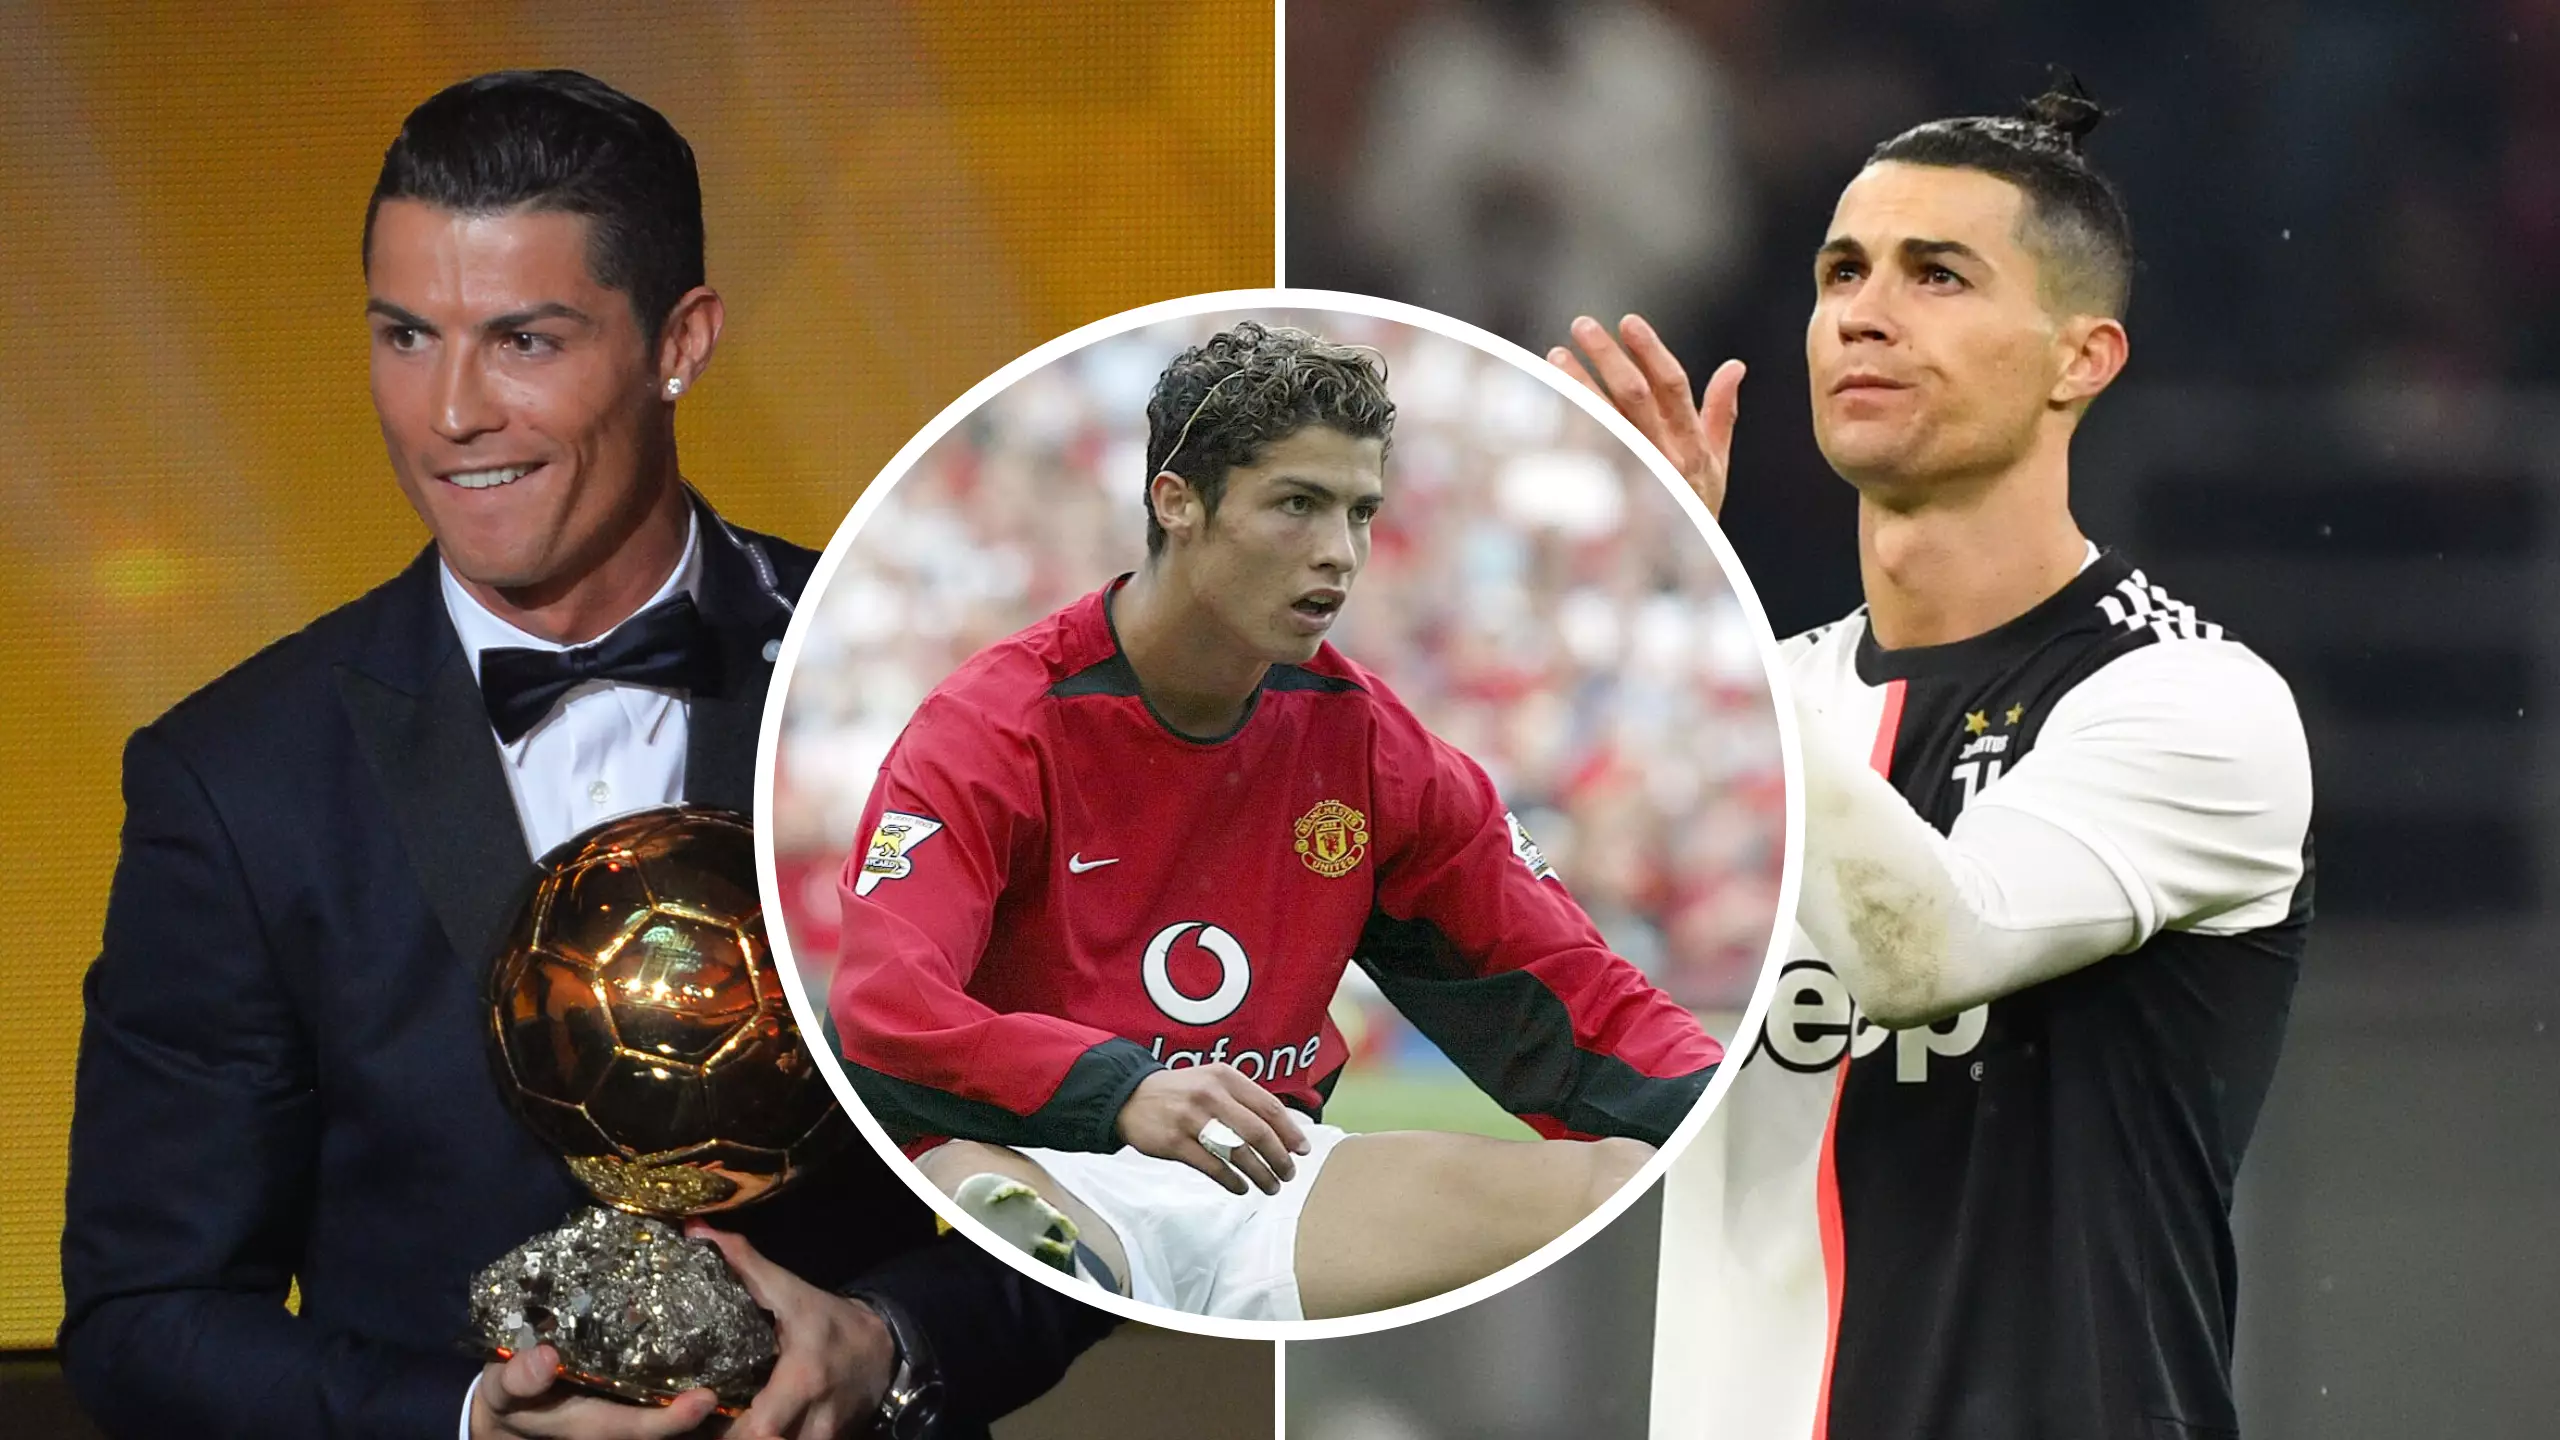 Cristiano Ronaldo's Former Teammate Brilliantly Explains How He Made It To The Top